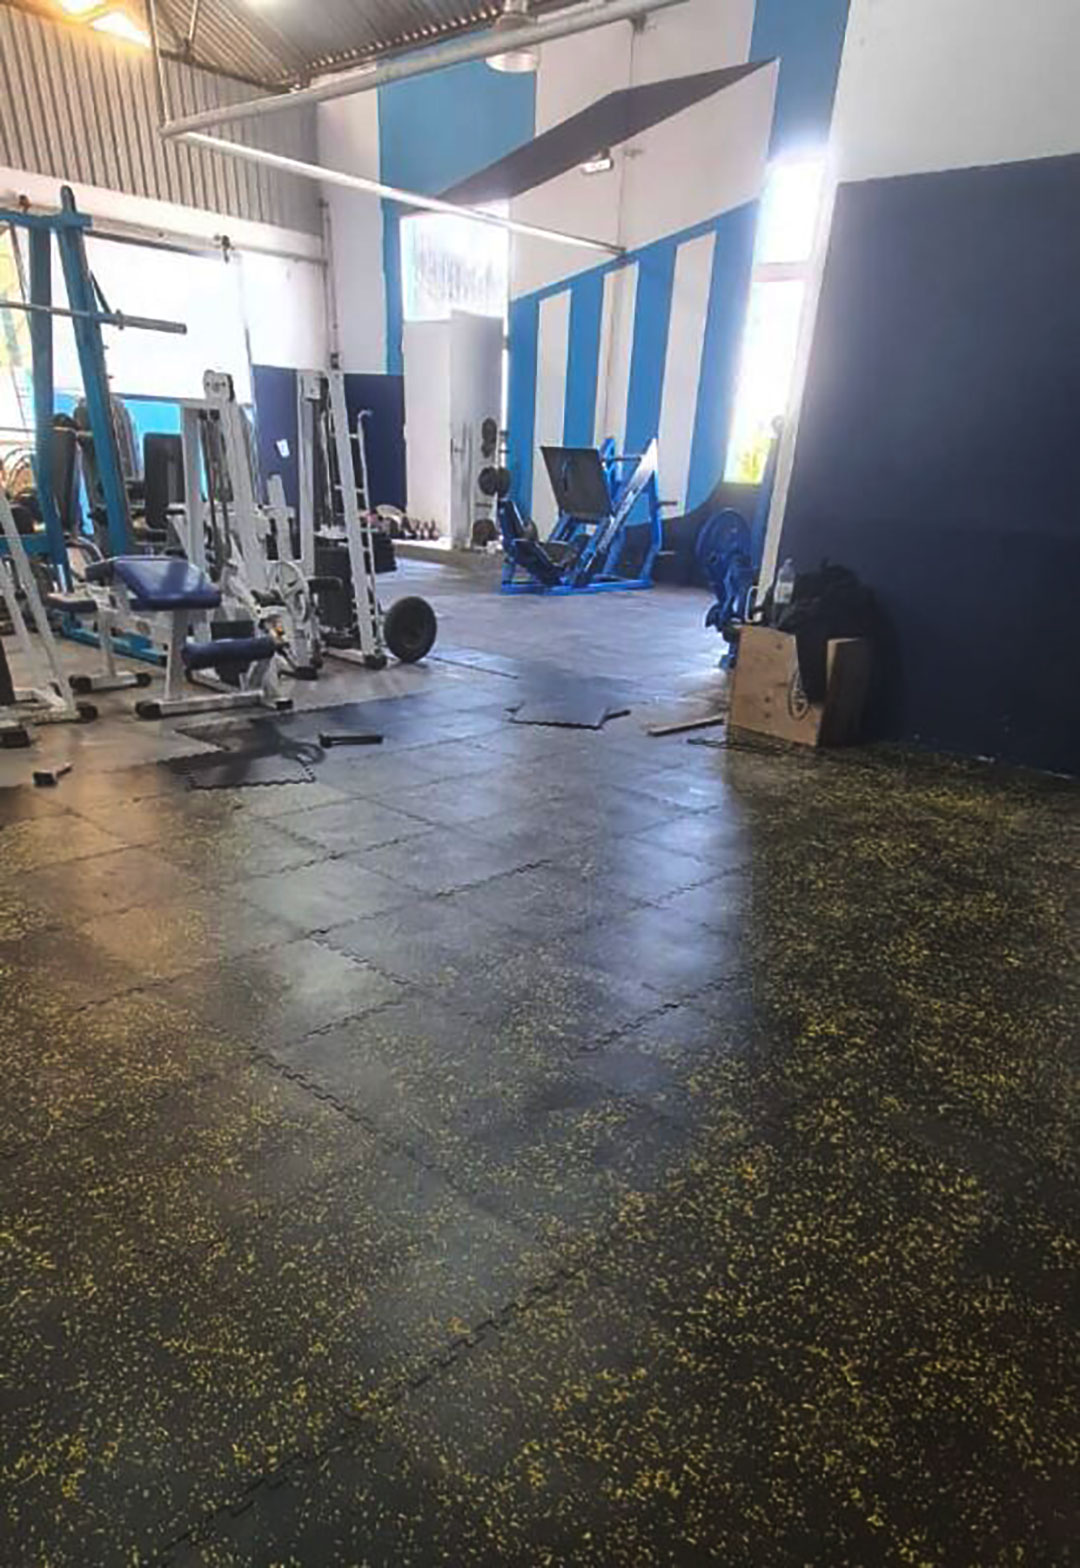 This is how the gym looked after the placement of the floor donated by Chiquito (Photo: Racing de Alma)